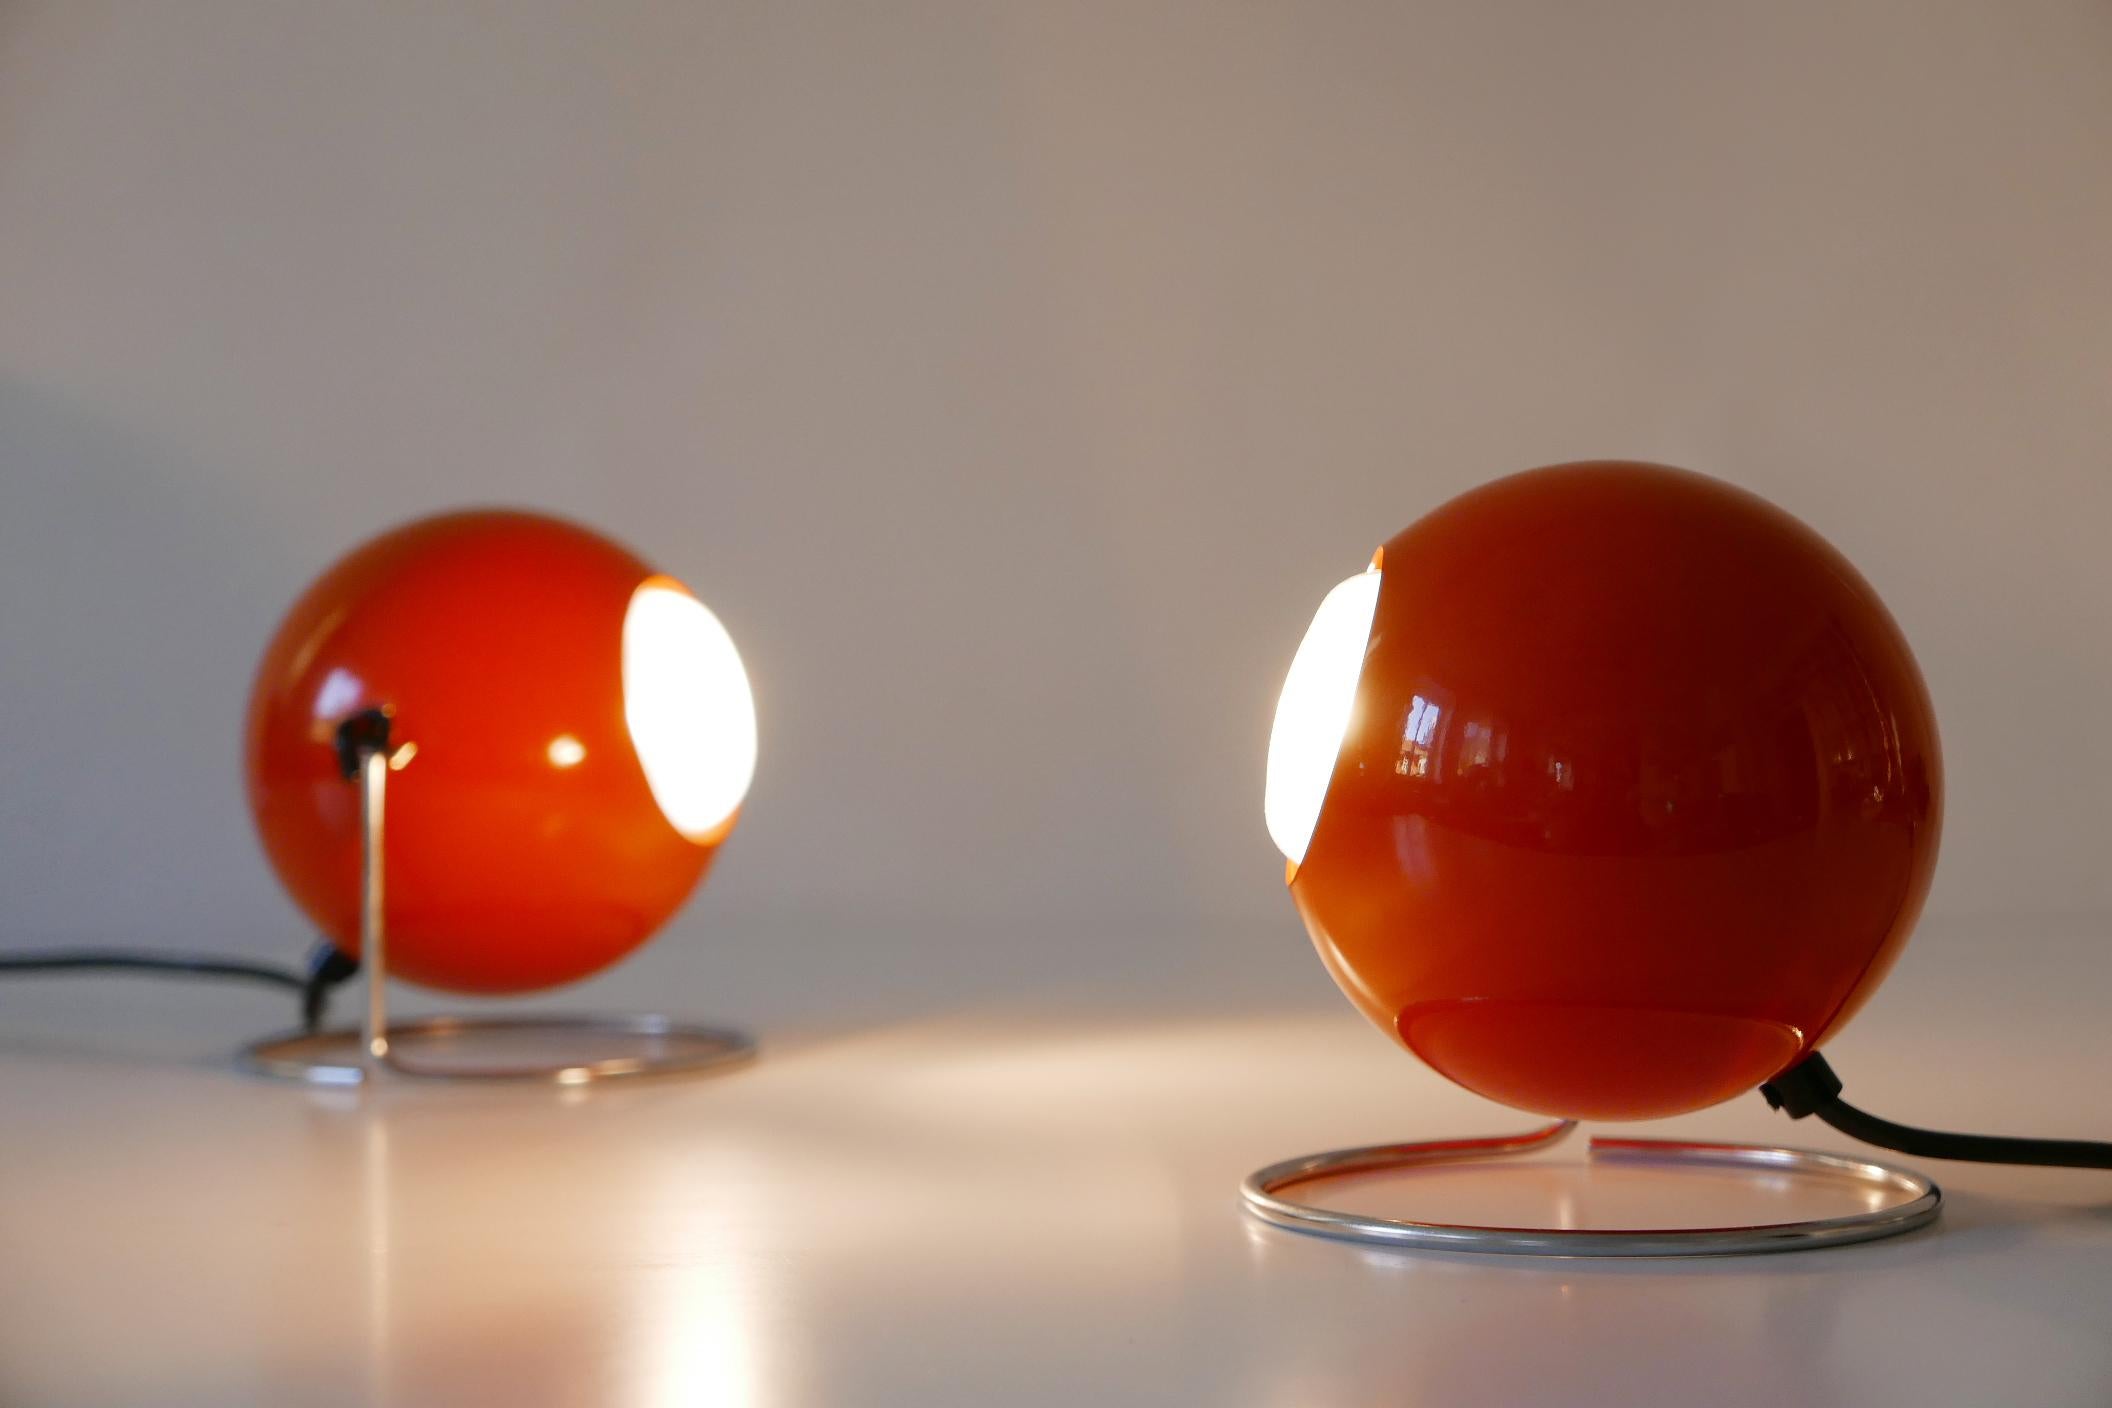 Set of two extremely rare, lovely Mid-Century Modern 'Eye' table lamps. Designed and manufactured by ERCO Leuchten, 1960s-1970s, Germany. Manufacturers label inside the lamp shades (see the last image).

Executed in red-orange enameled aluminium and